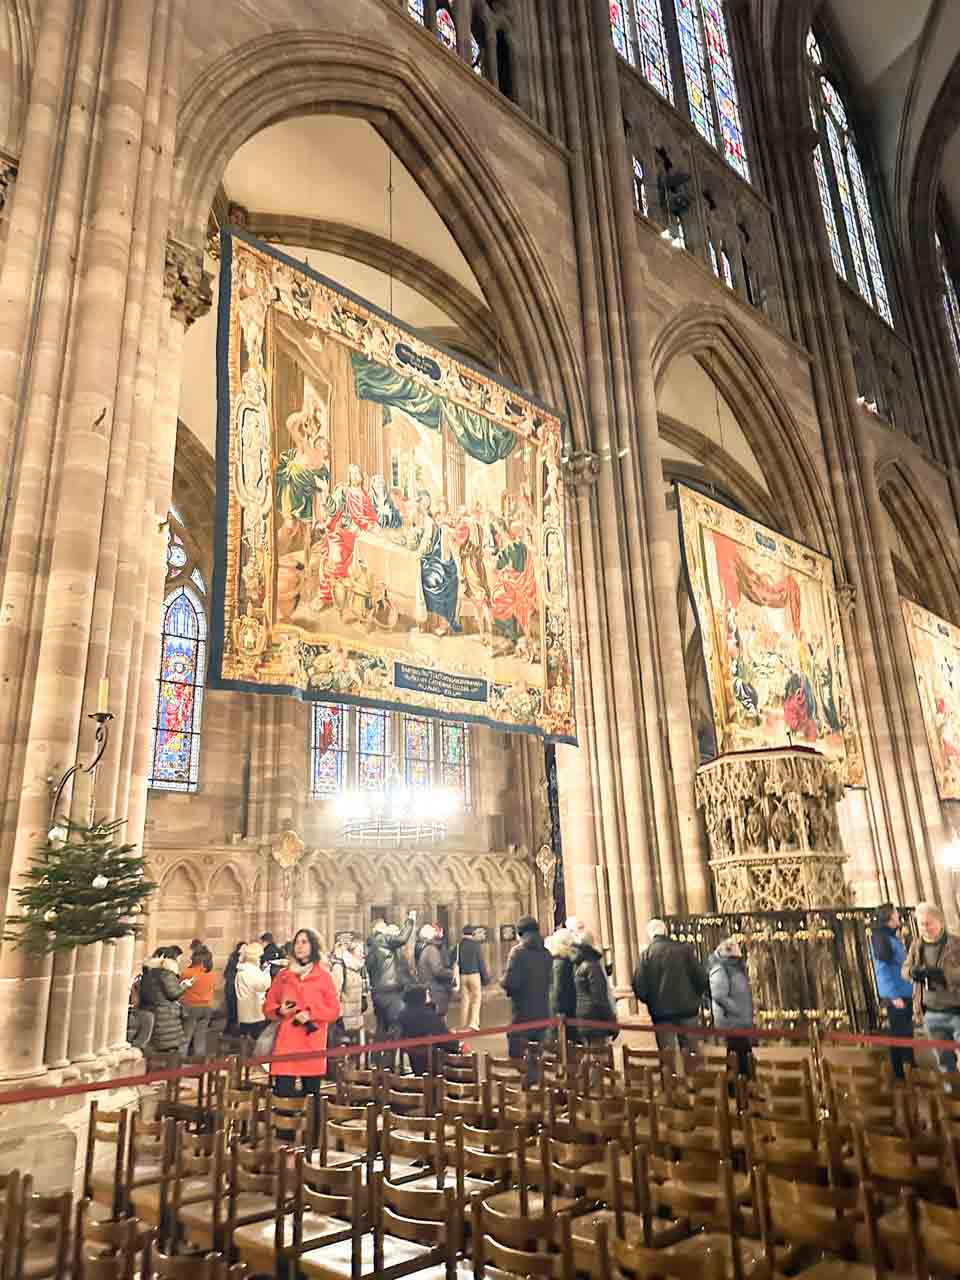 Visitors admiring the grand tapestries hanging within the nave of Strasbourg Cathedral